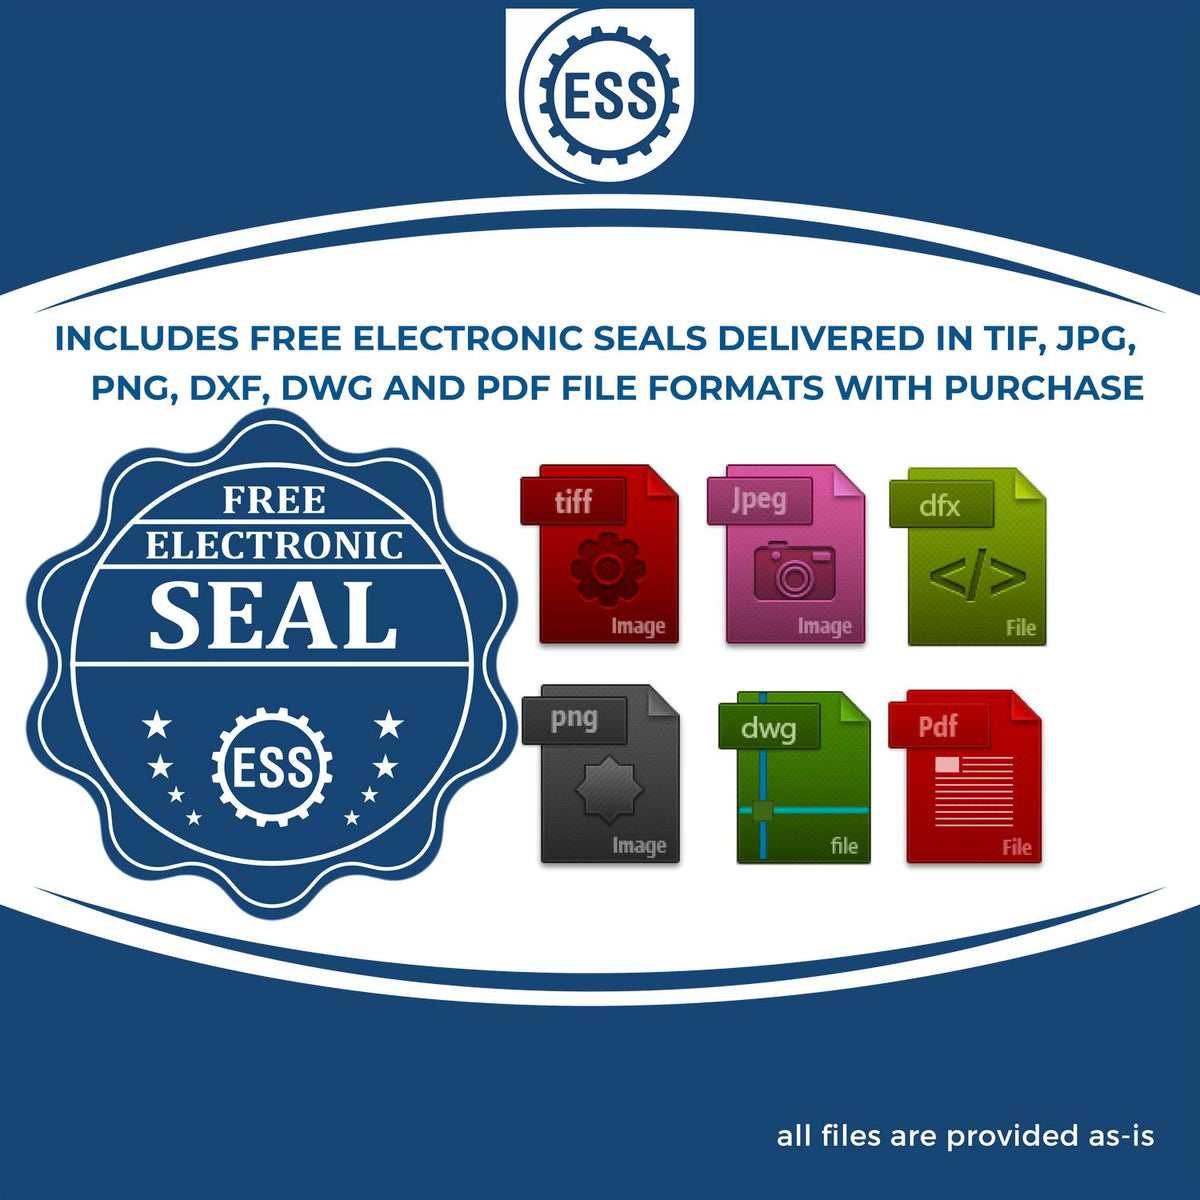 An infographic for the free electronic seal for the Heavy Duty Cast Iron Ohio Engineer Seal Embosser illustrating the different file type icons such as DXF, DWG, TIF, JPG and PNG.